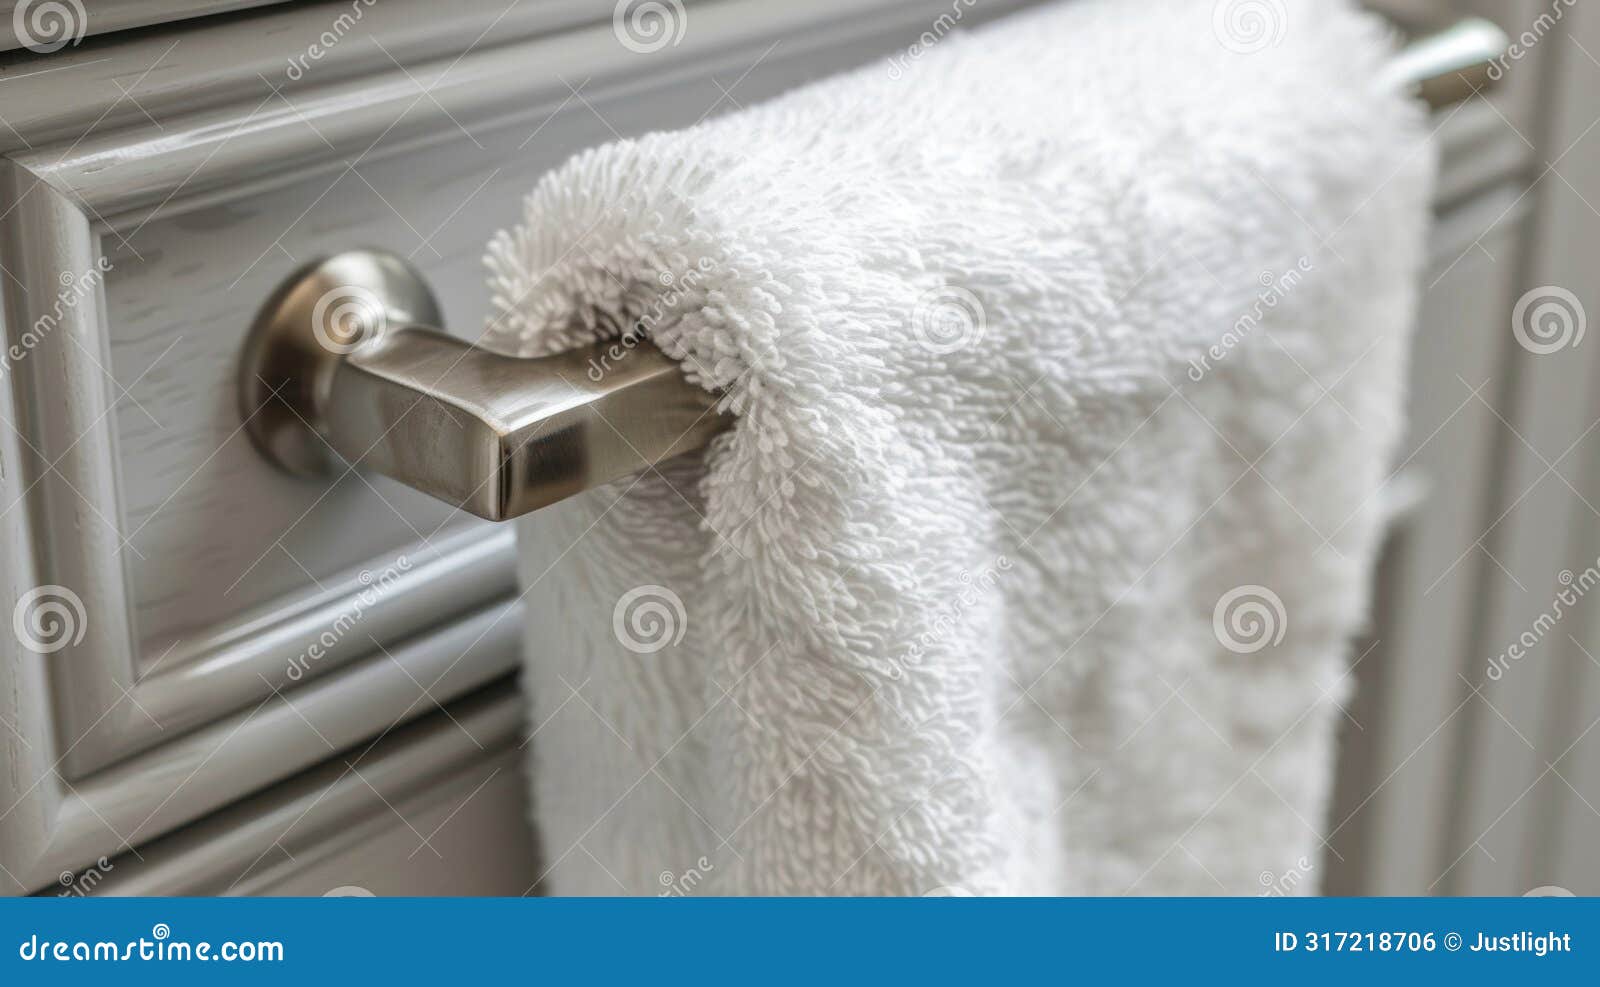 a fluffy kitchen towel dd over the door handle used to clean up any spills or messes